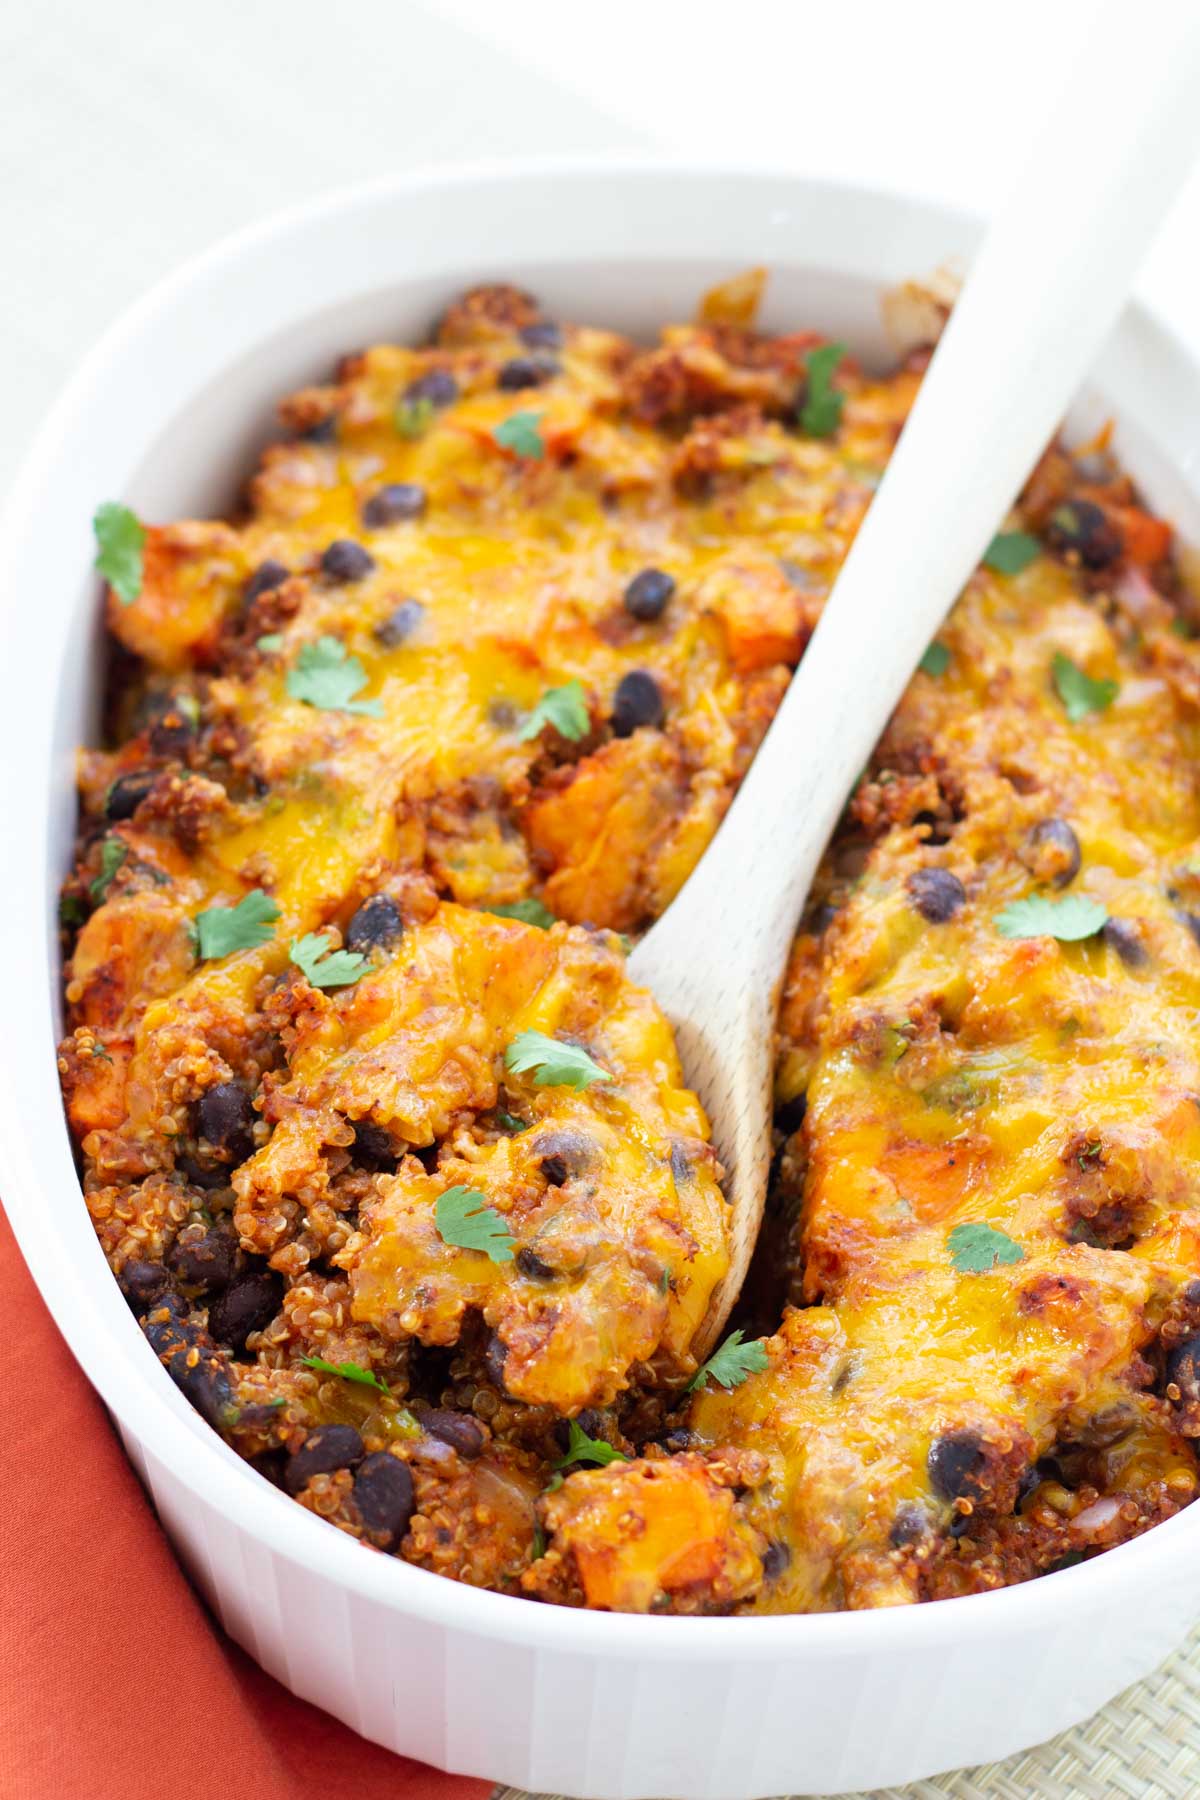 Vegetarian enchilada casserole in baking dish with wooden spoon.